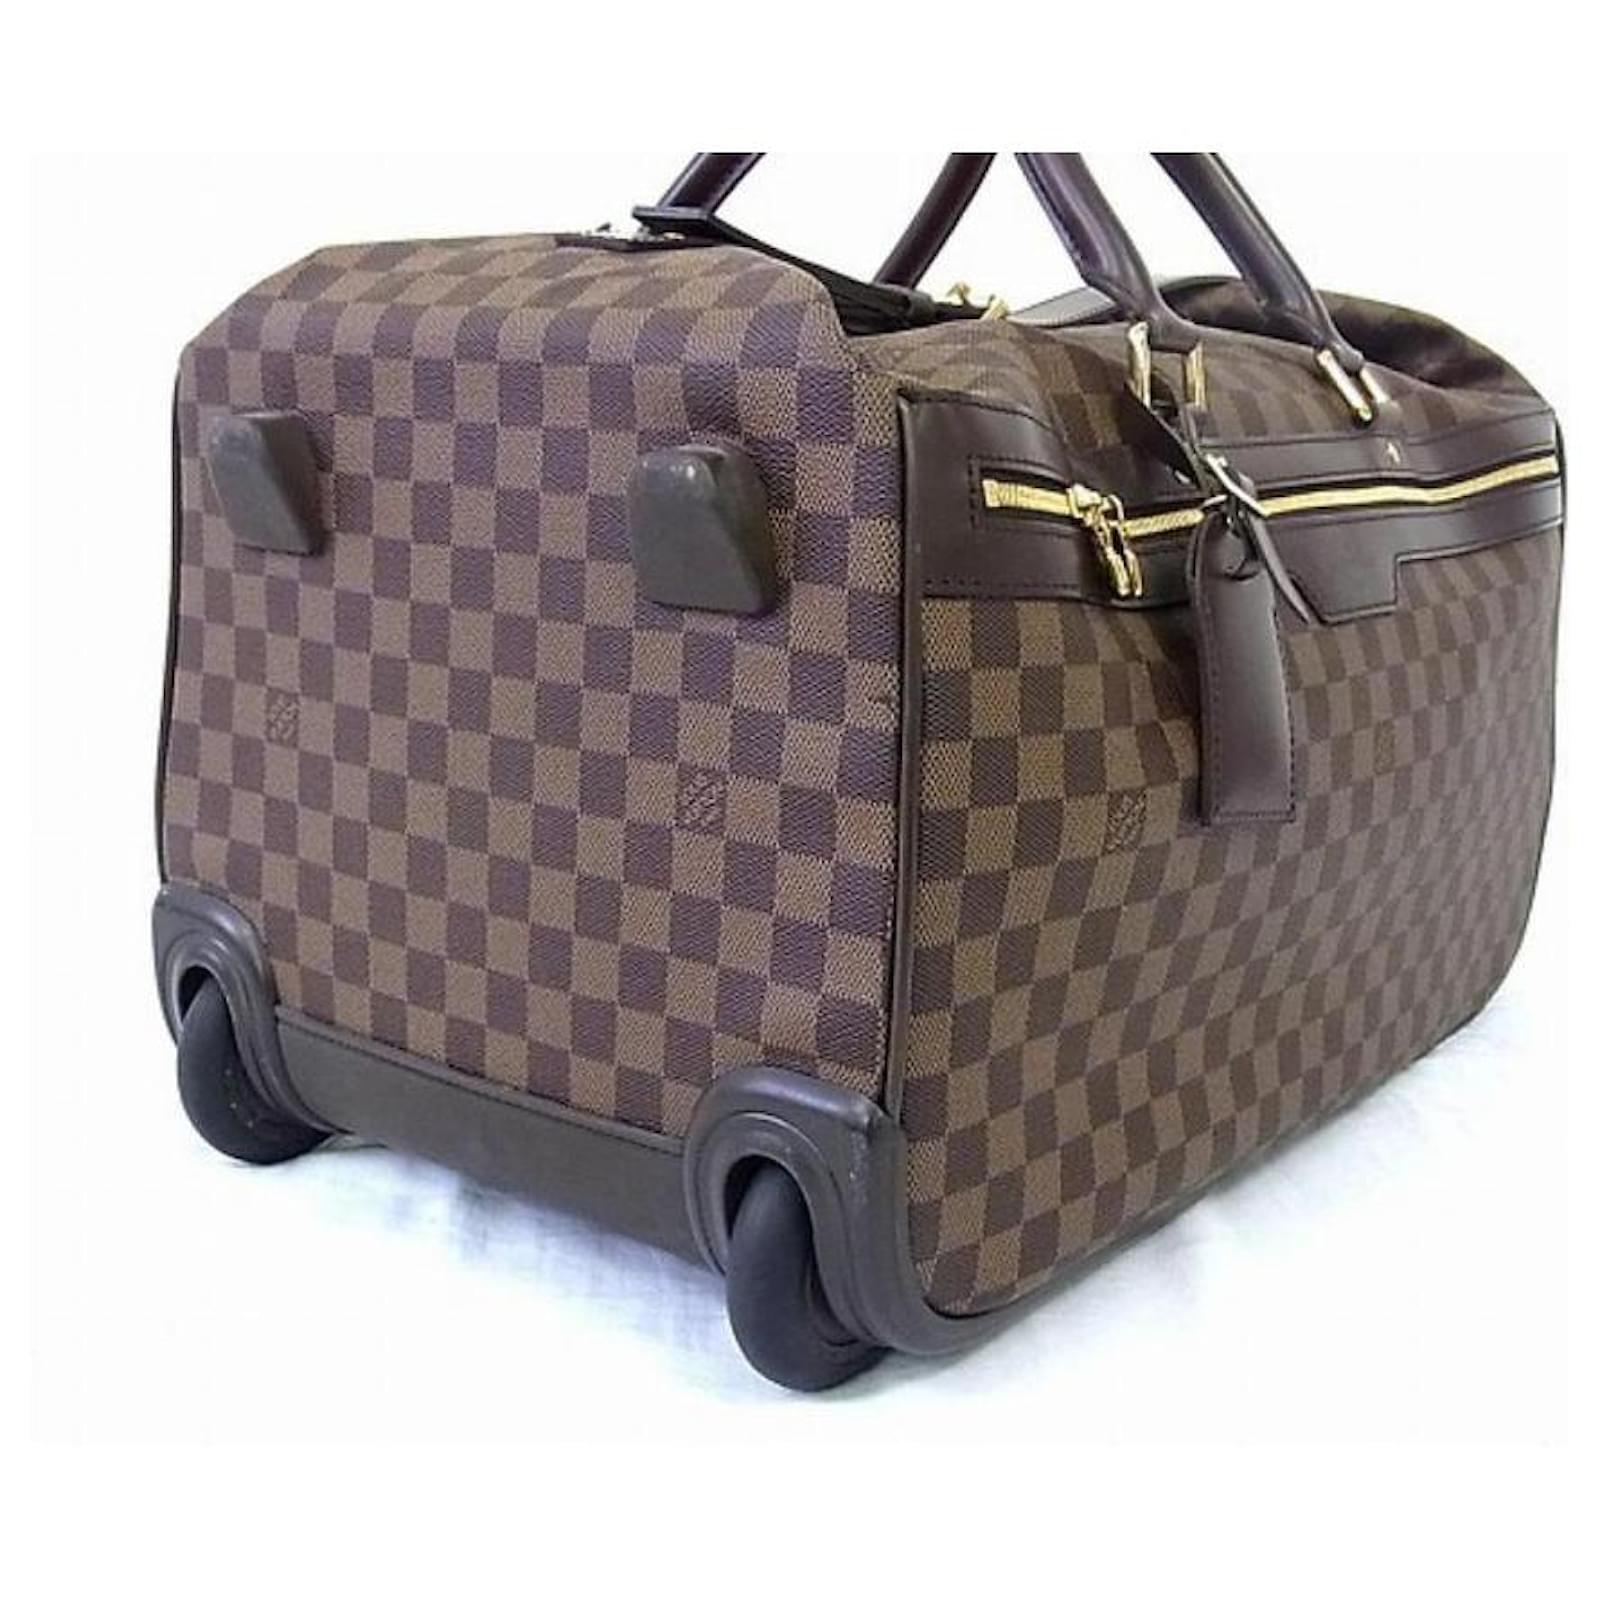 Louis Vuitton Damier Ebene Eole 50 Rolling Luggage at Jill's Consignment